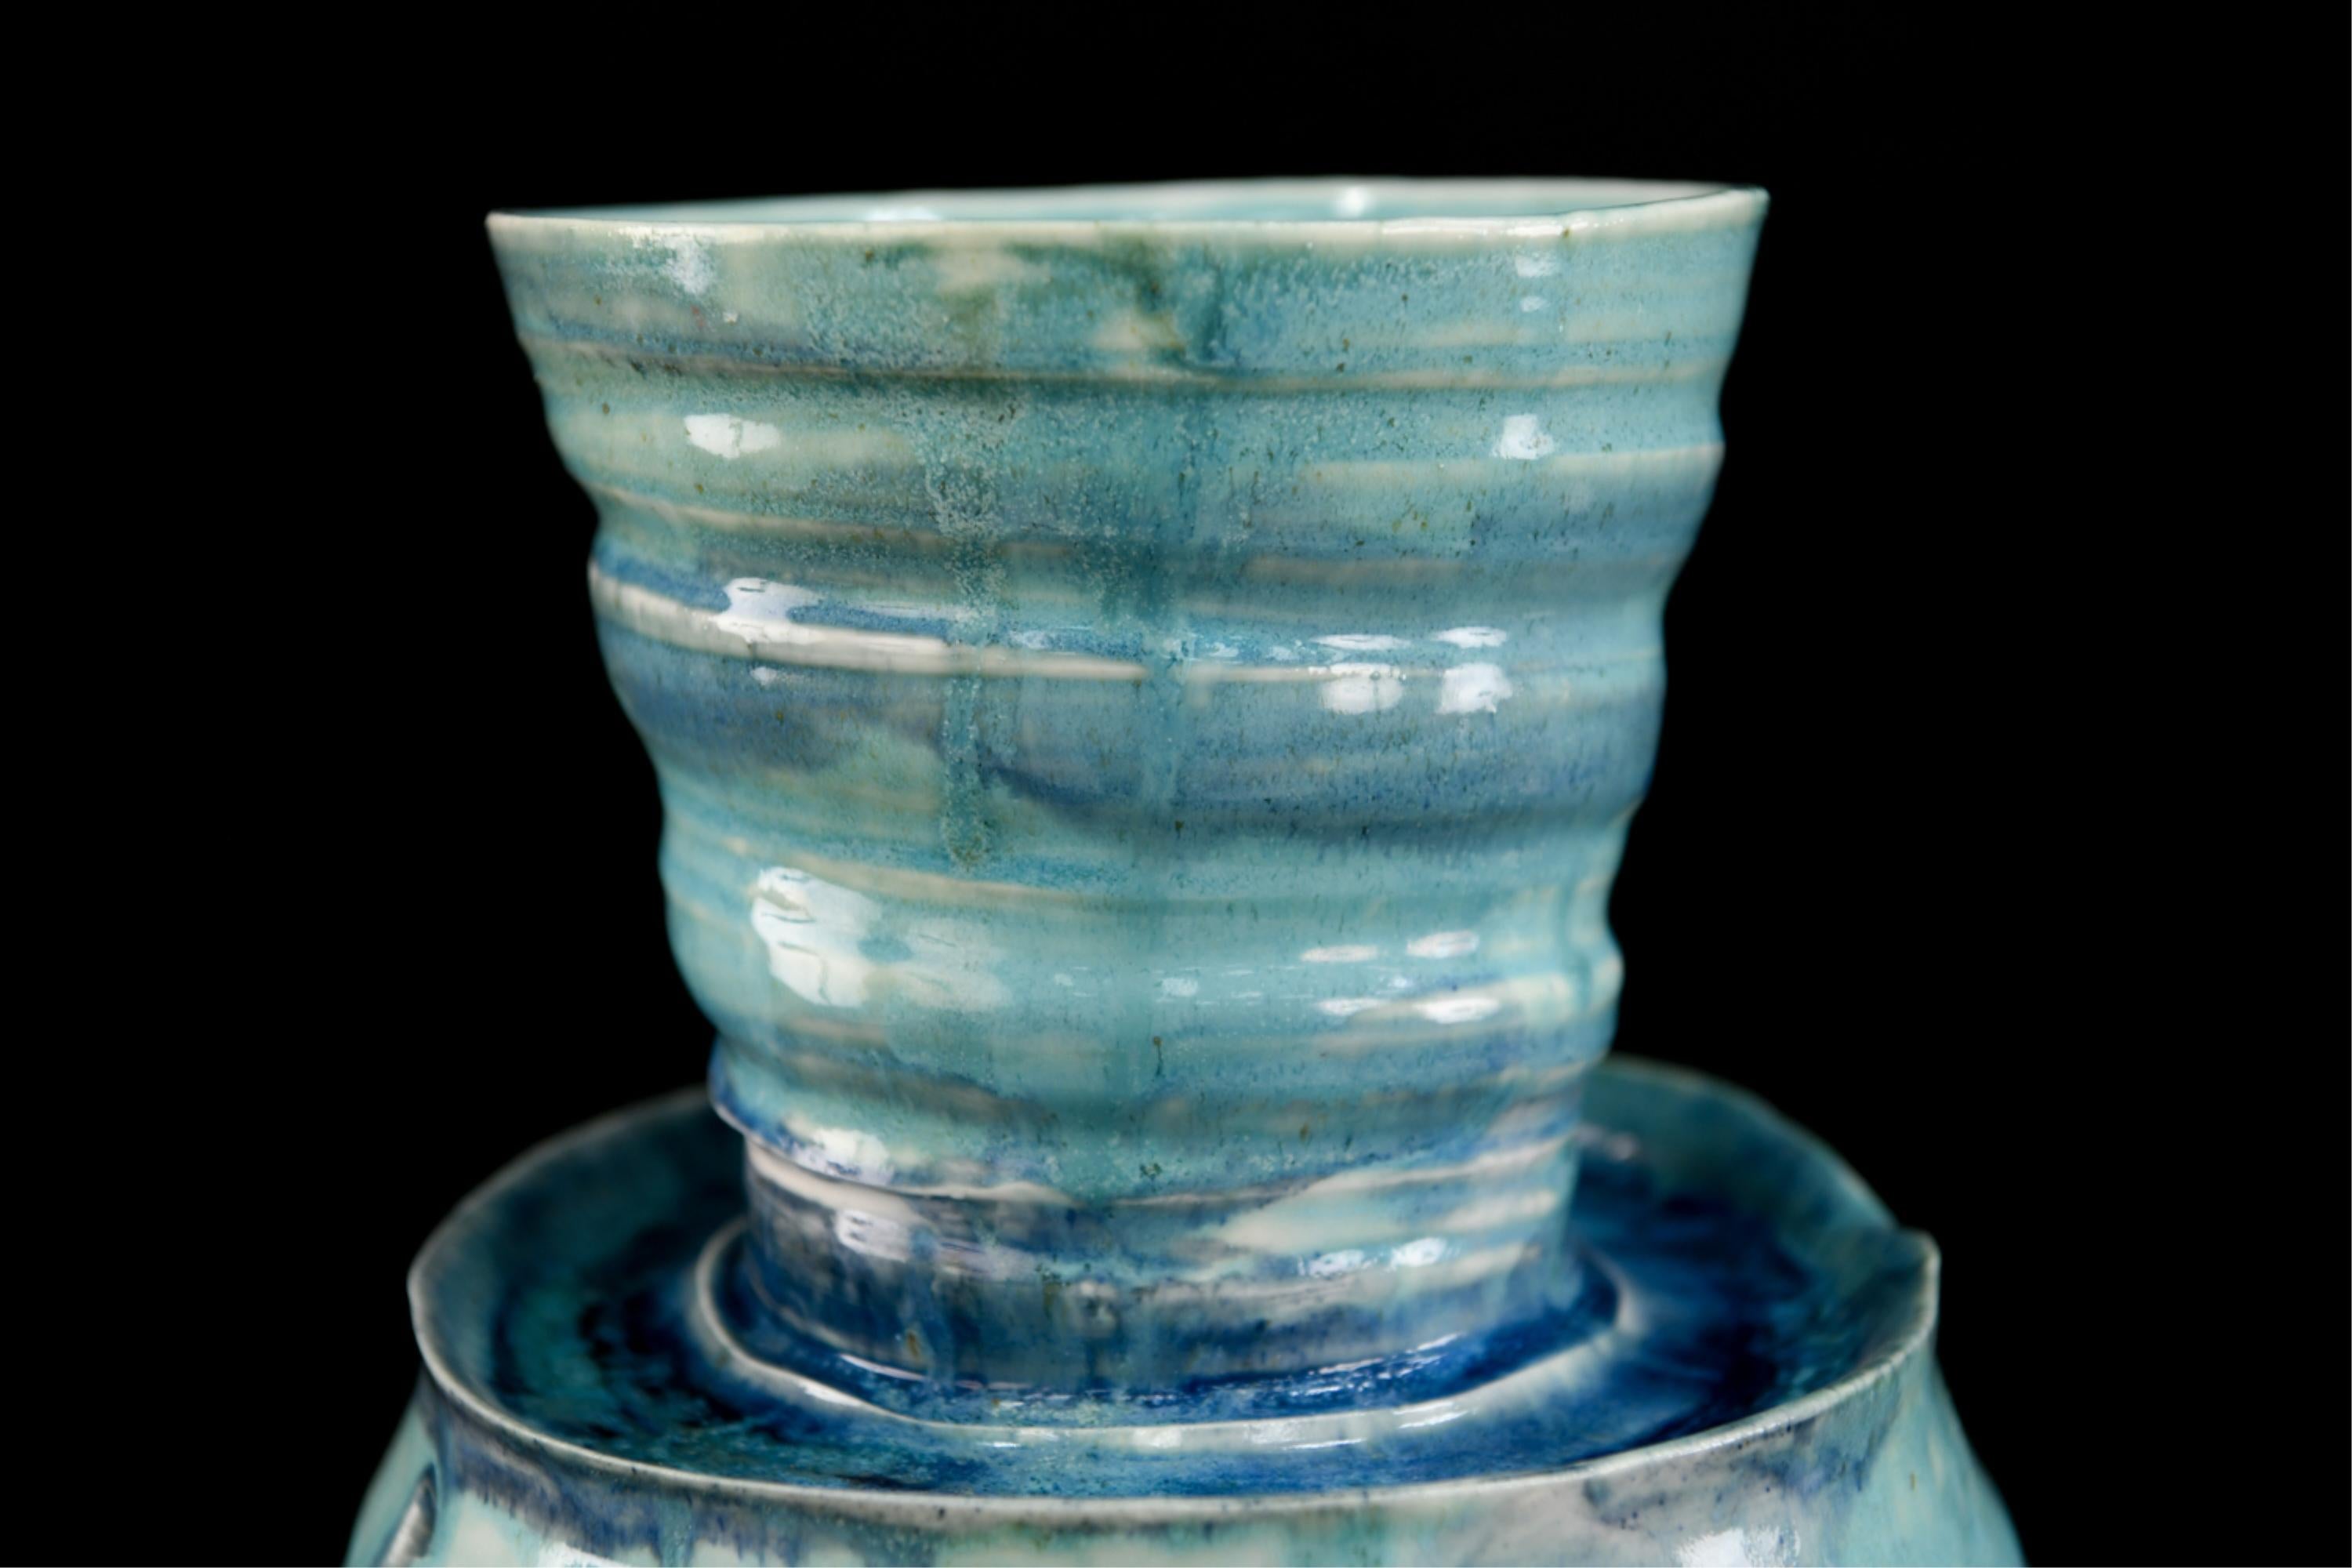 A beautiful Studio Pottery vase in turquoise blues and white glaze.